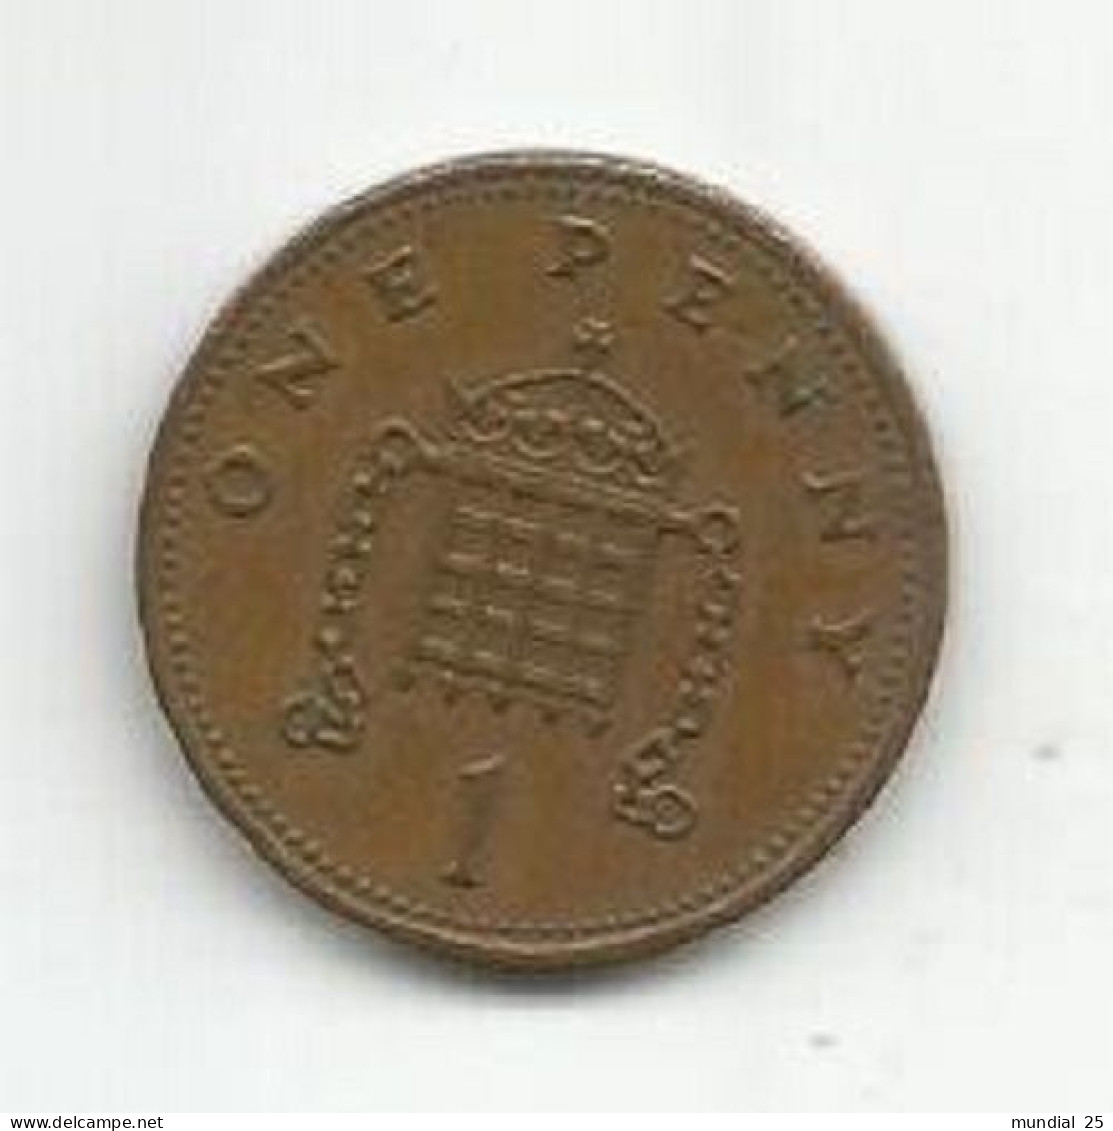 GREAT BRITAIN 1 PENNY 1989 - 1 Penny & 1 New Penny